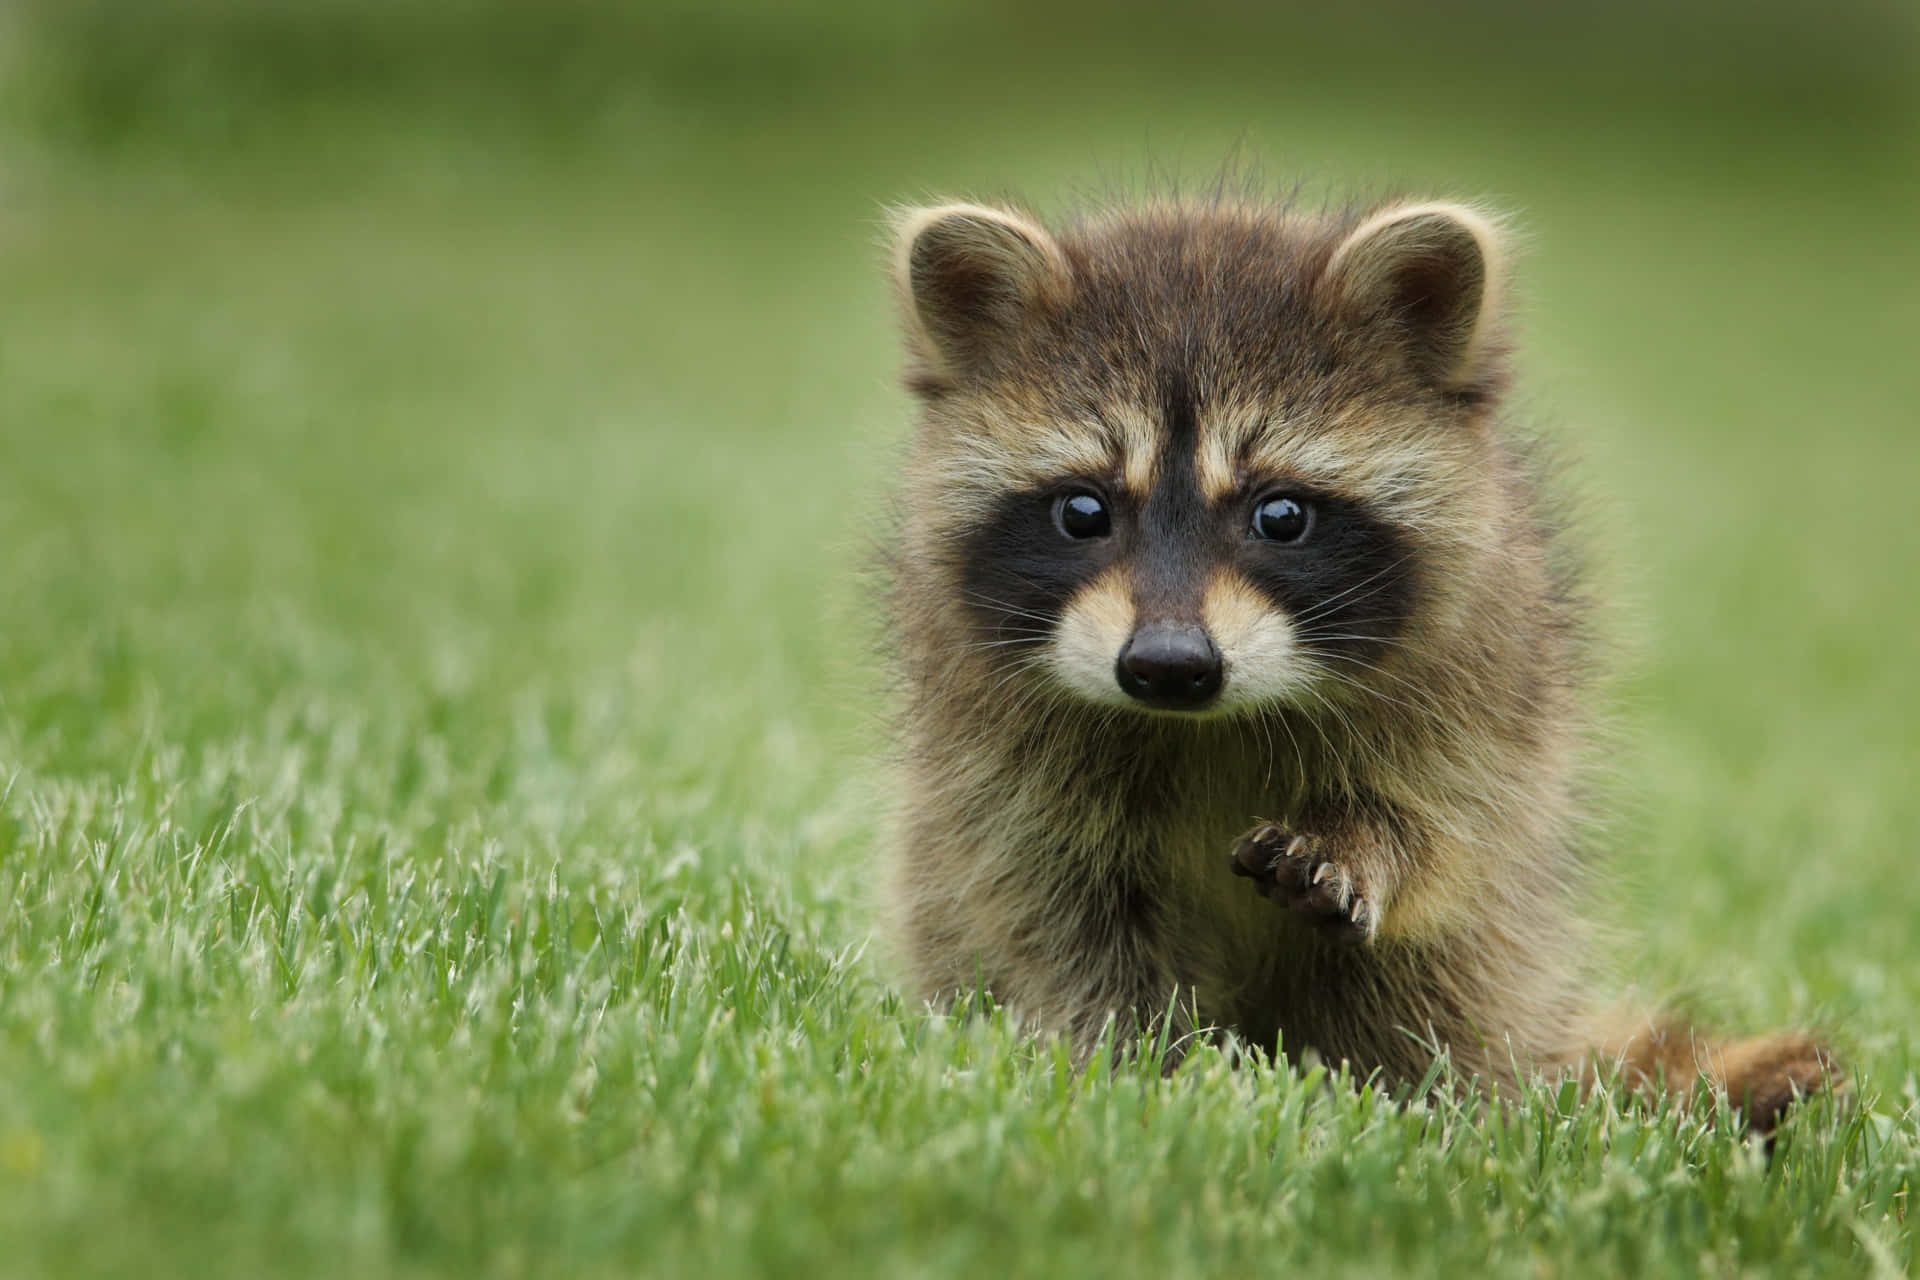 Baby Cute Raccoon Sitting On Grass Picture